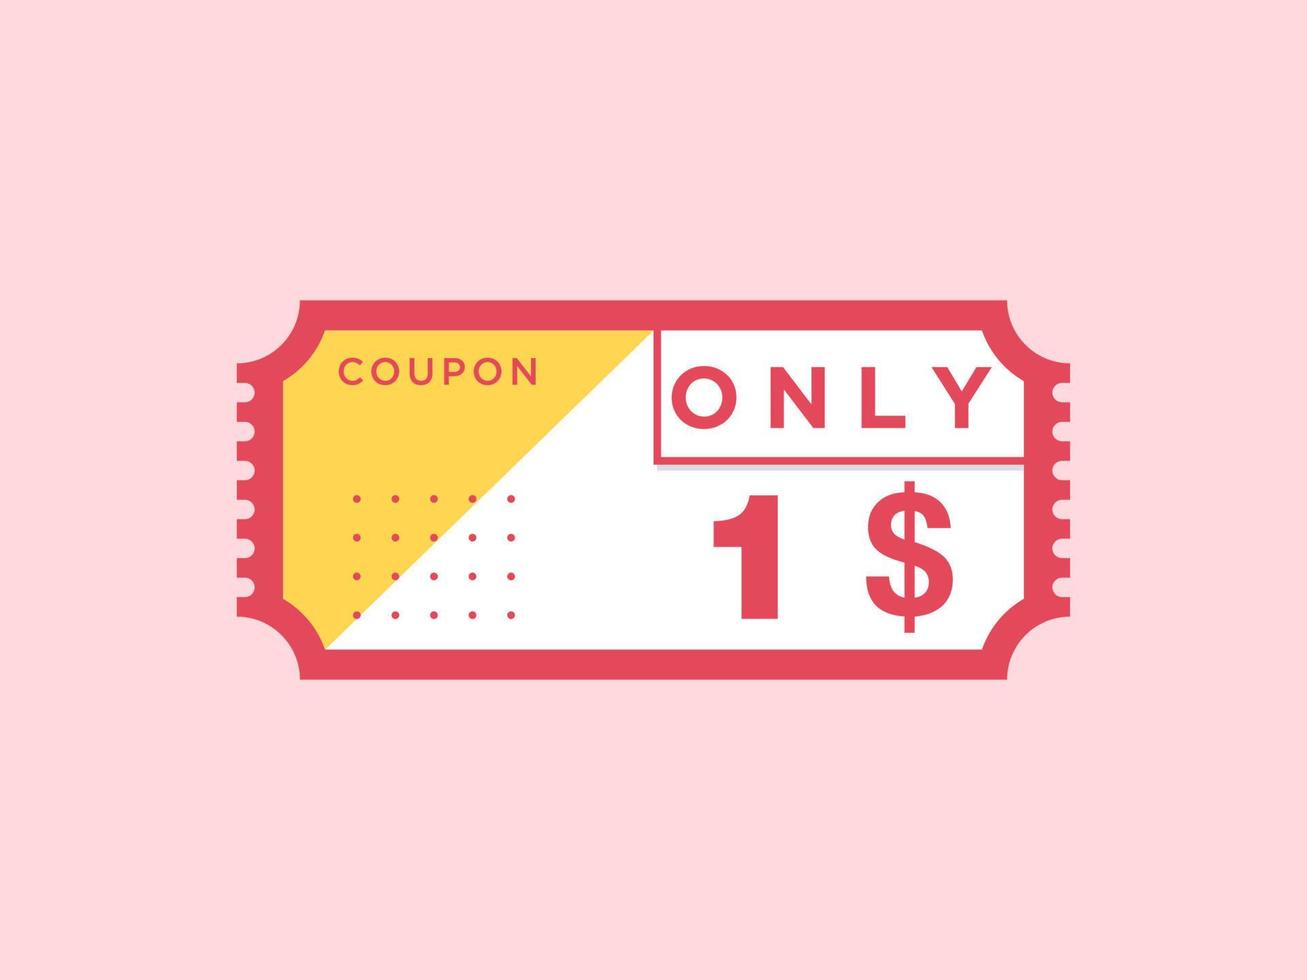 1 Dollar Only Coupon sign or Label or discount voucher Money Saving label, with coupon vector illustration summer offer ends weekend holiday